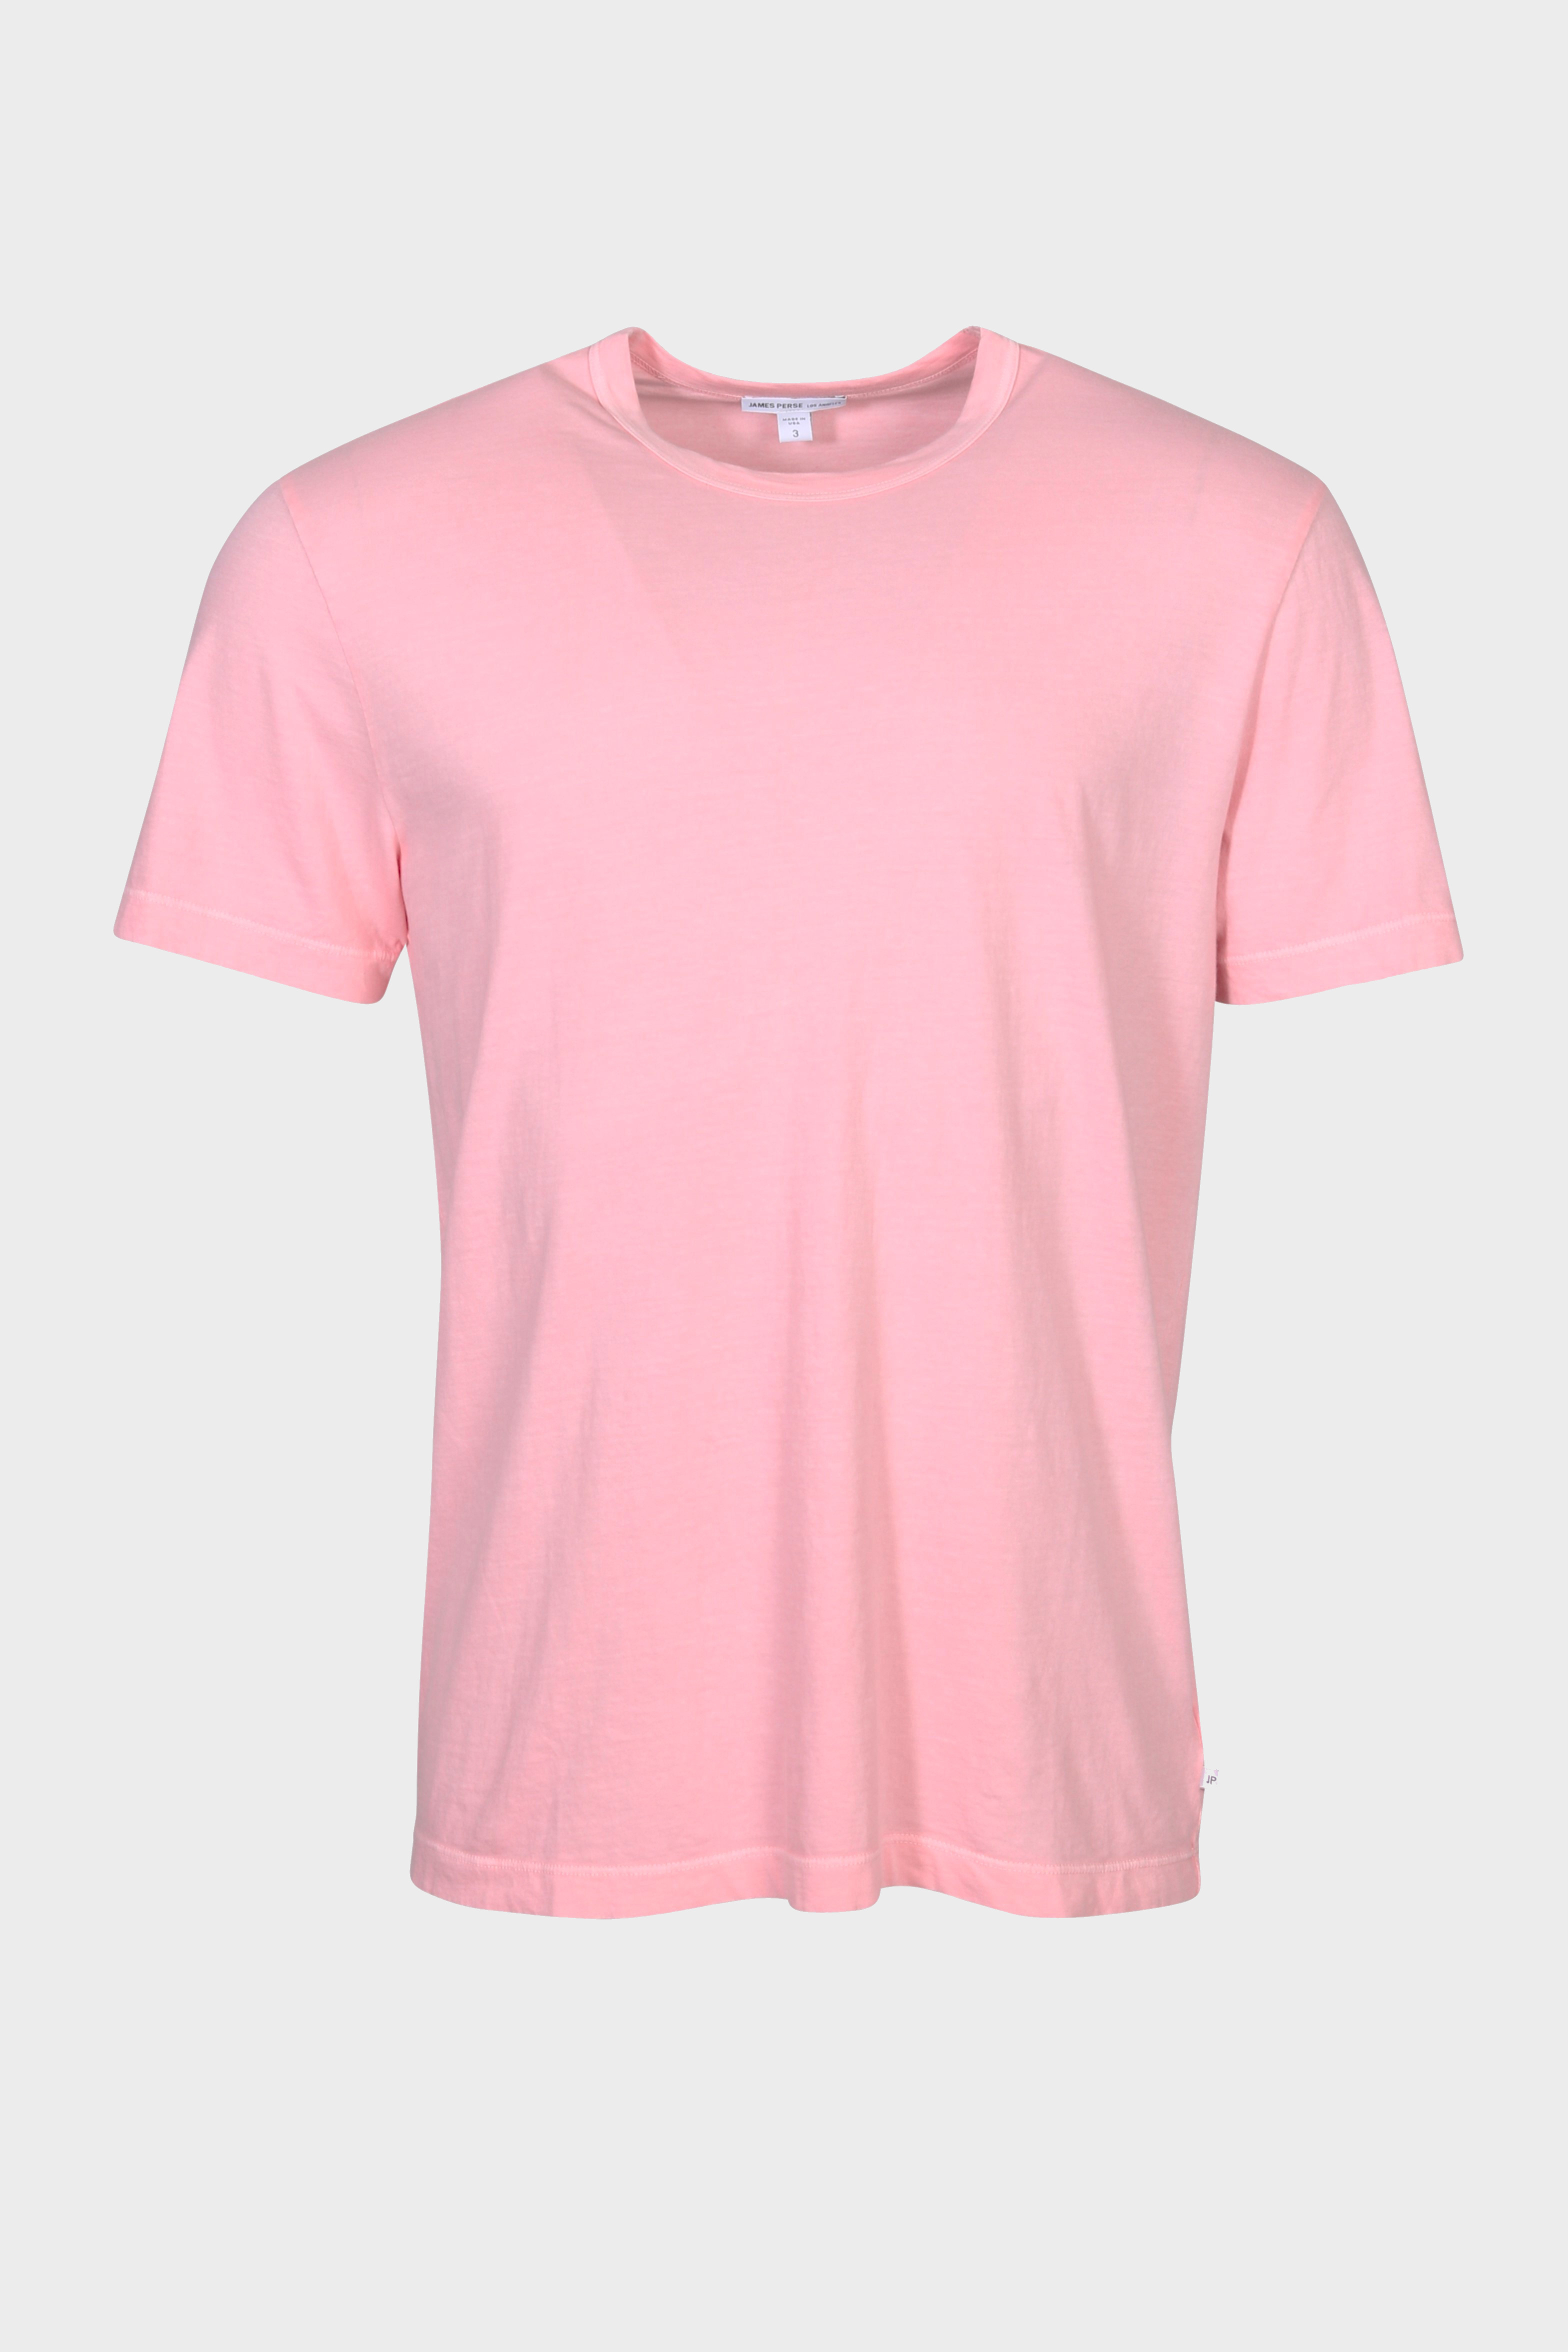 JAMES PERSE Crewneck T-Shirt in Washed Pink